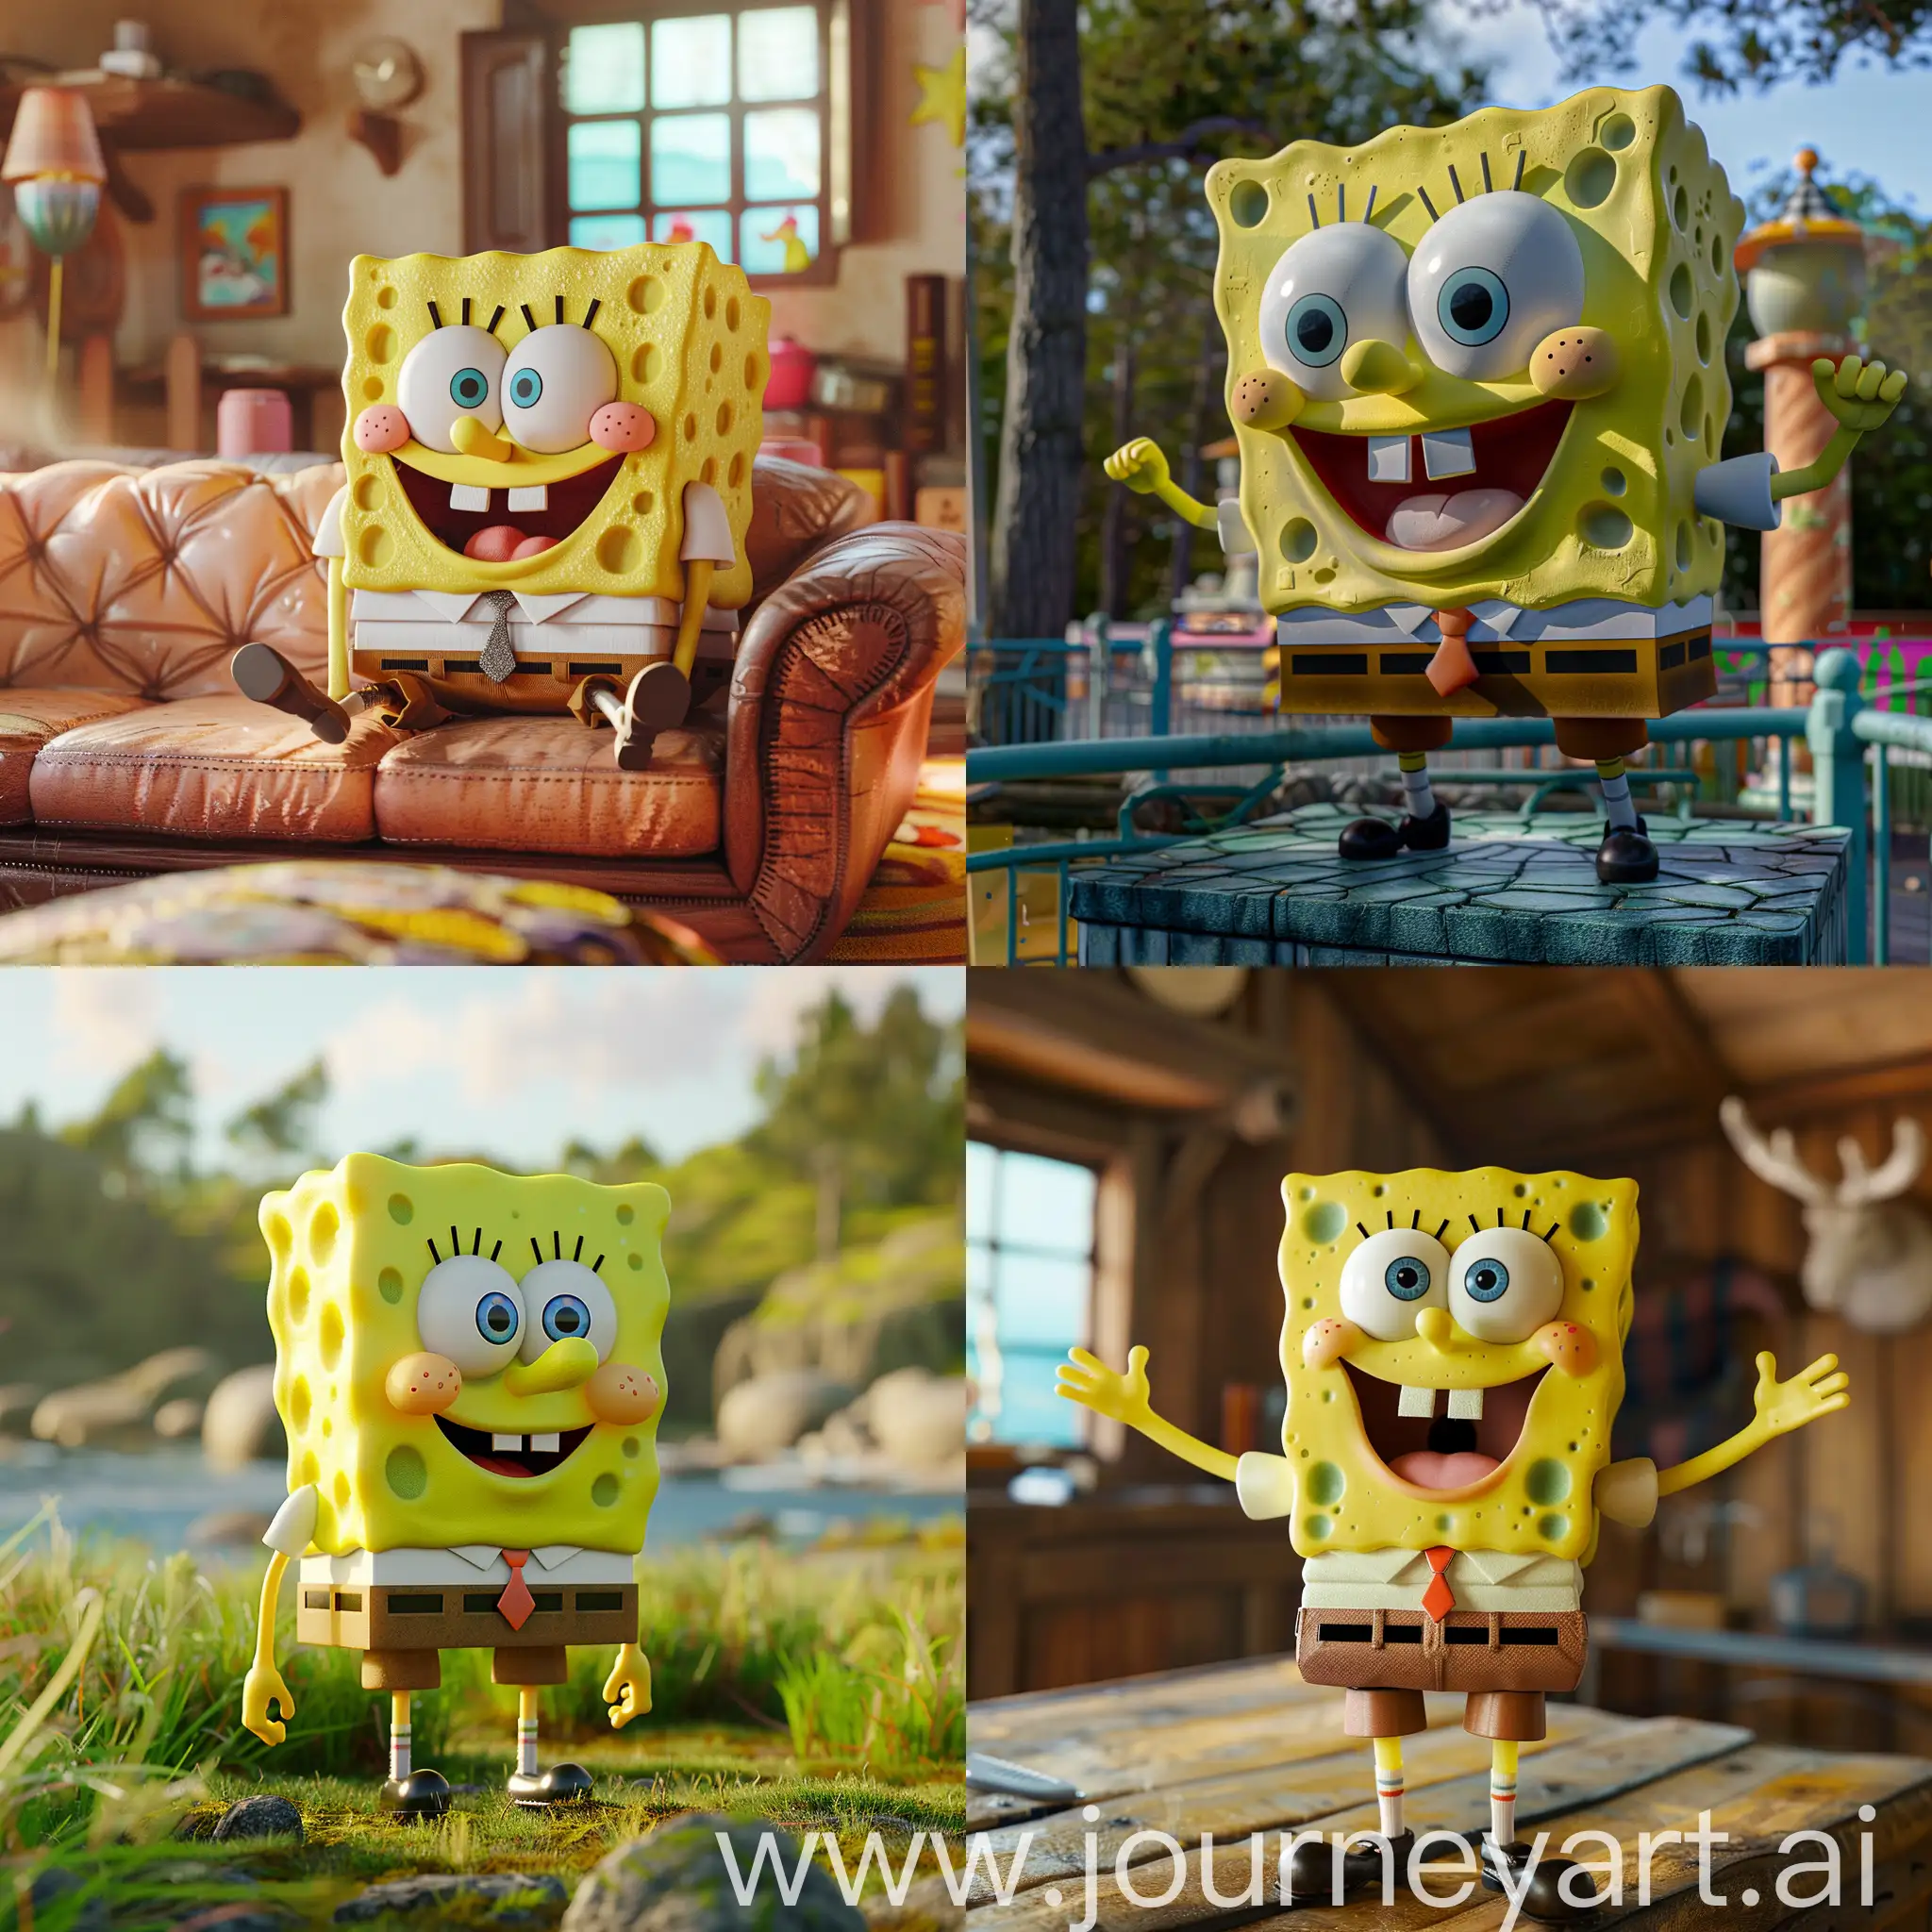 SpongeBob-SquarePants-Surfaces-in-the-Real-World